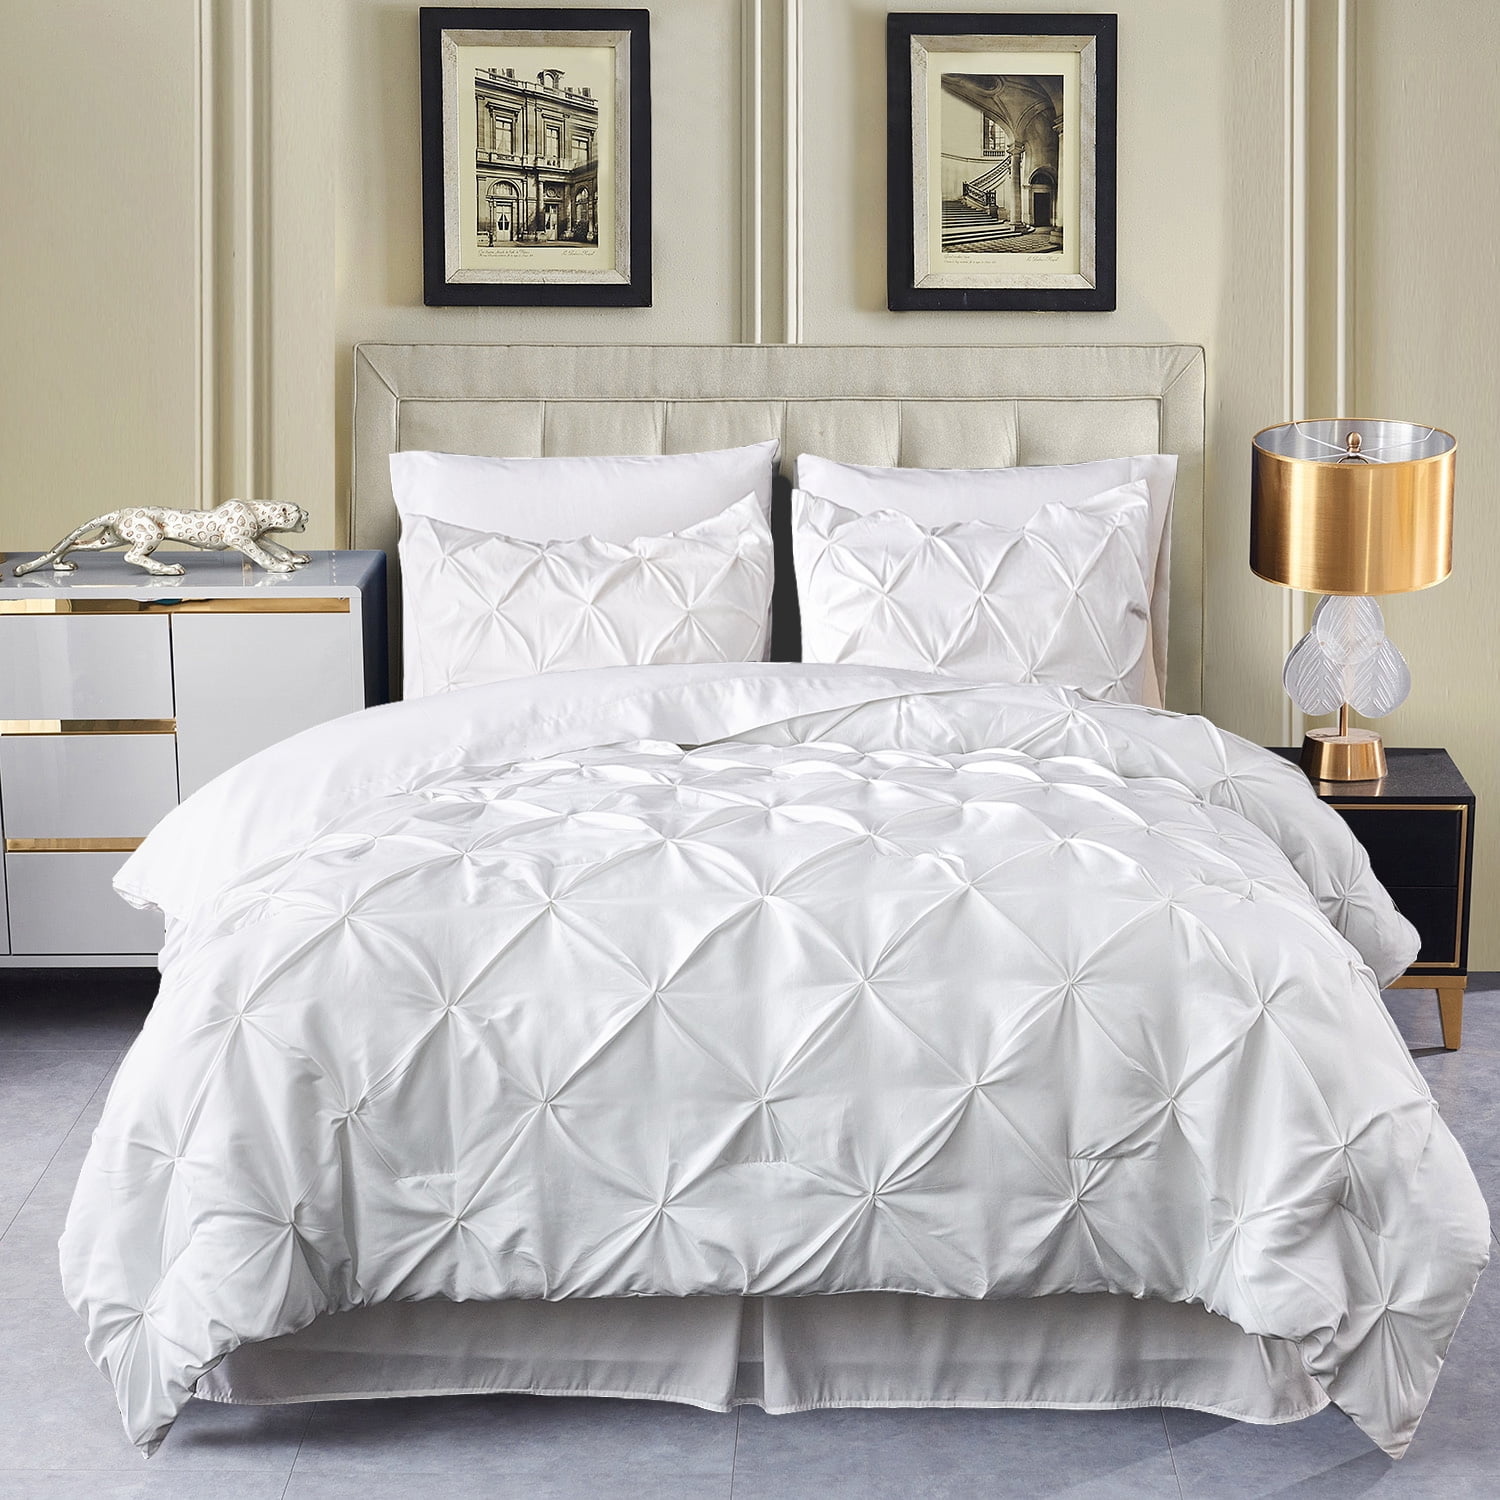 Deluxe Soft Tufted Color Pieced Sewn Queen Cal King Full Comforter Set 7 pcs 